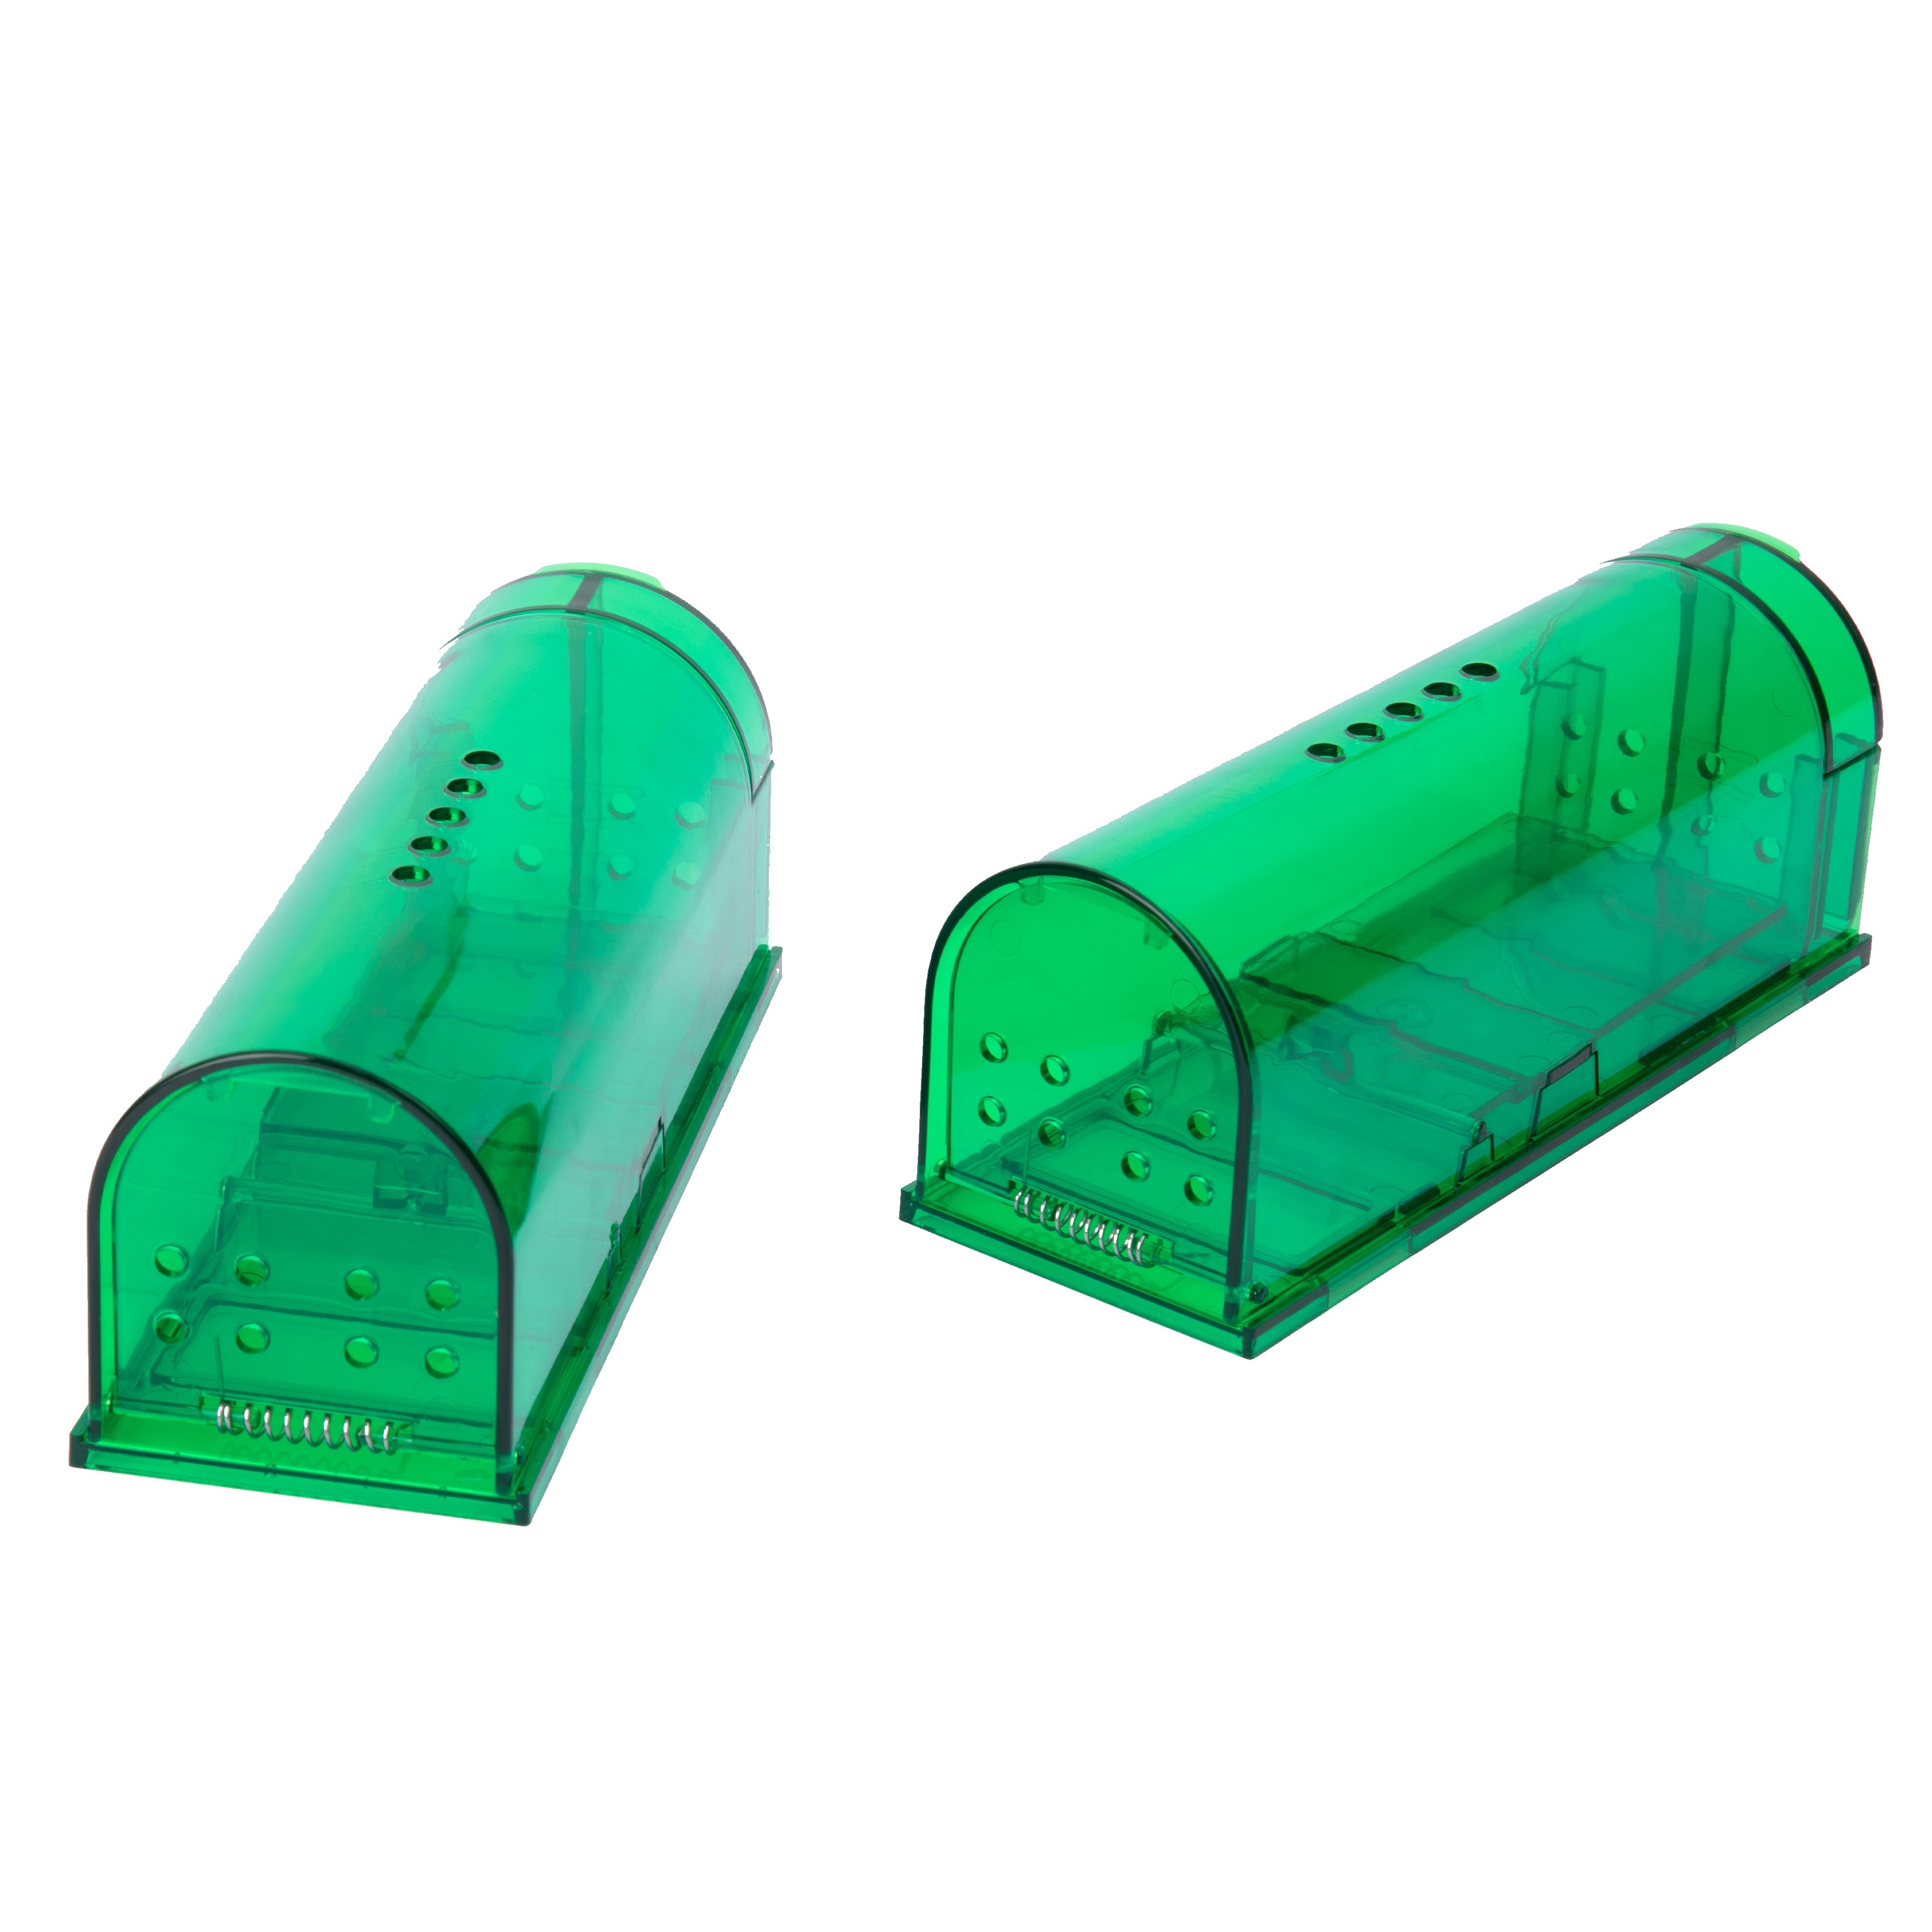 

Green Plastic Rat Trap Cage, Humane Mouse Catcher For Garden And Lawn, Reusable Rodent Control Trap Without Electricity - Pp Material Pest Control